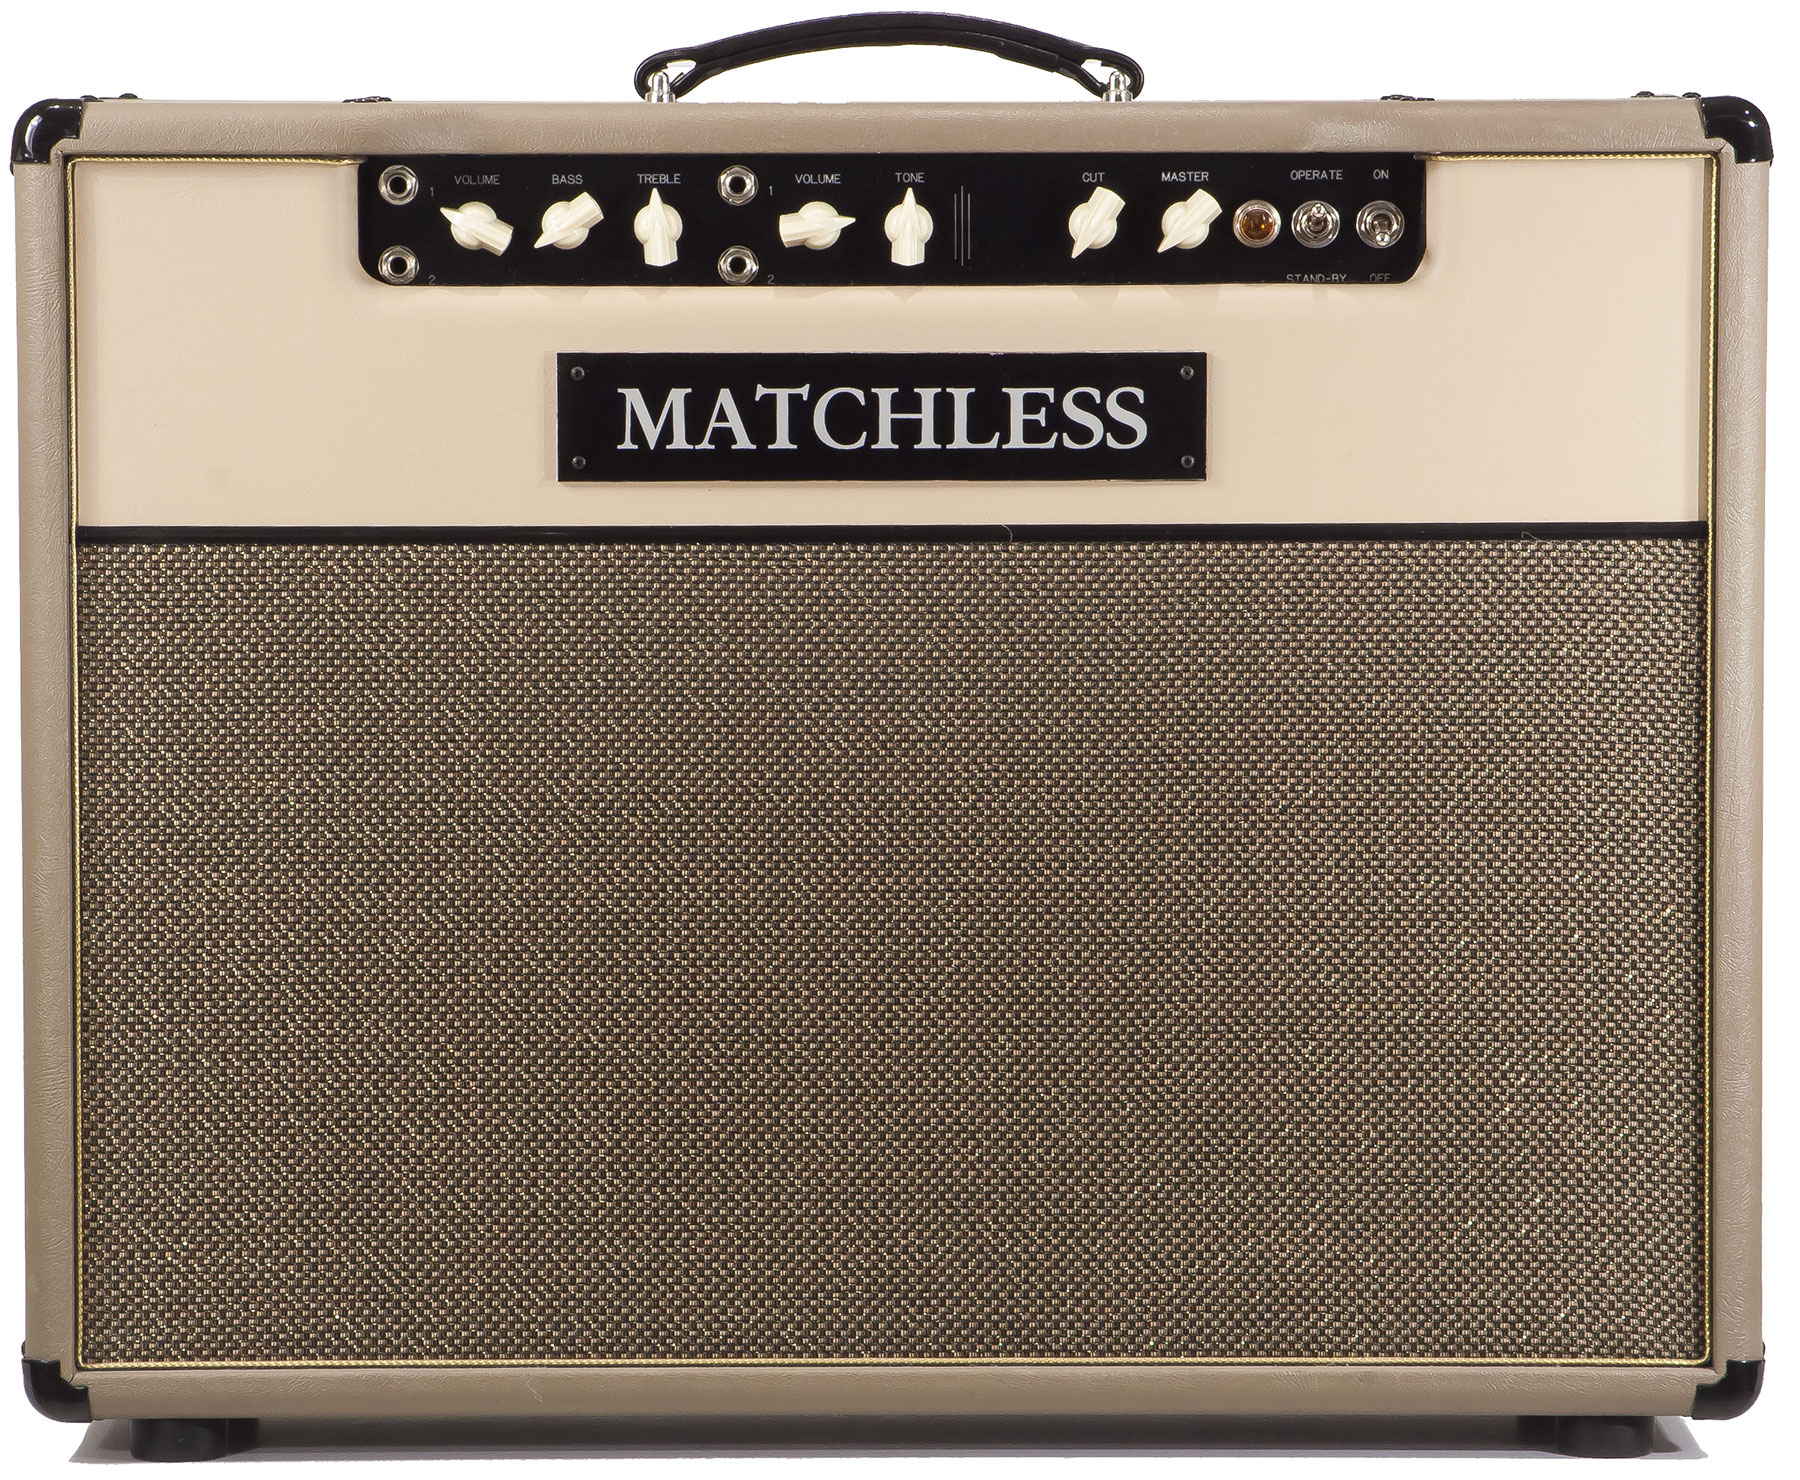 Matchless Dc-30 30w 2x12 Cappuccino/gold - Combo für E-Gitarre - Variation 1